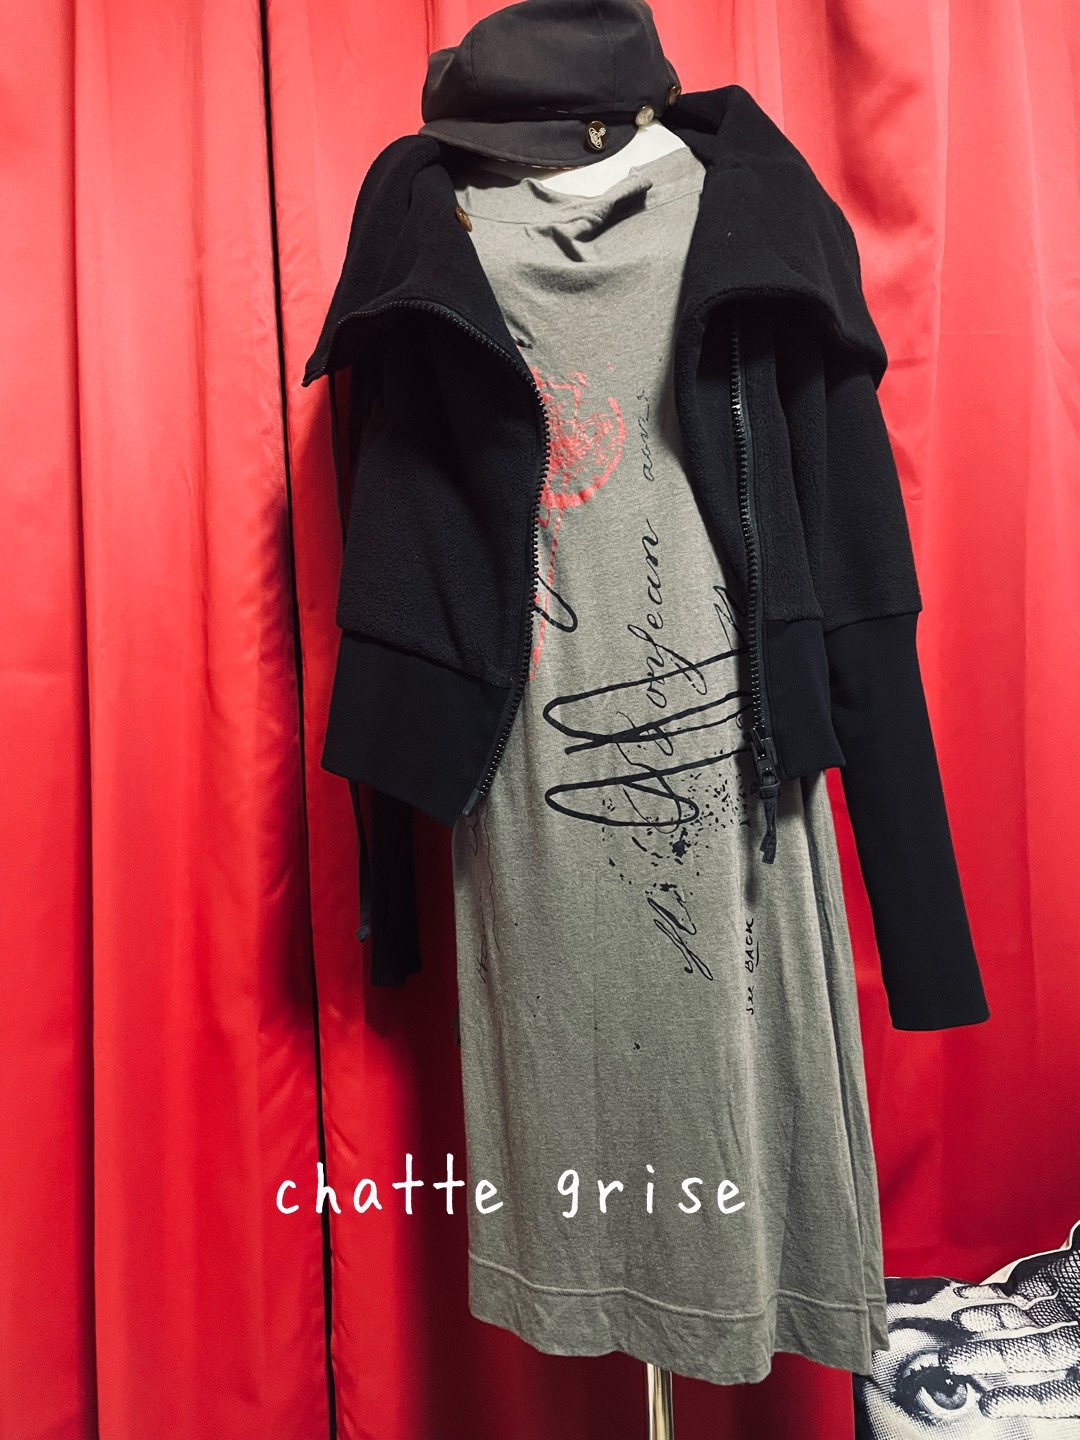 chatte griseシャットグリーズめぐ #Viviennewestwood